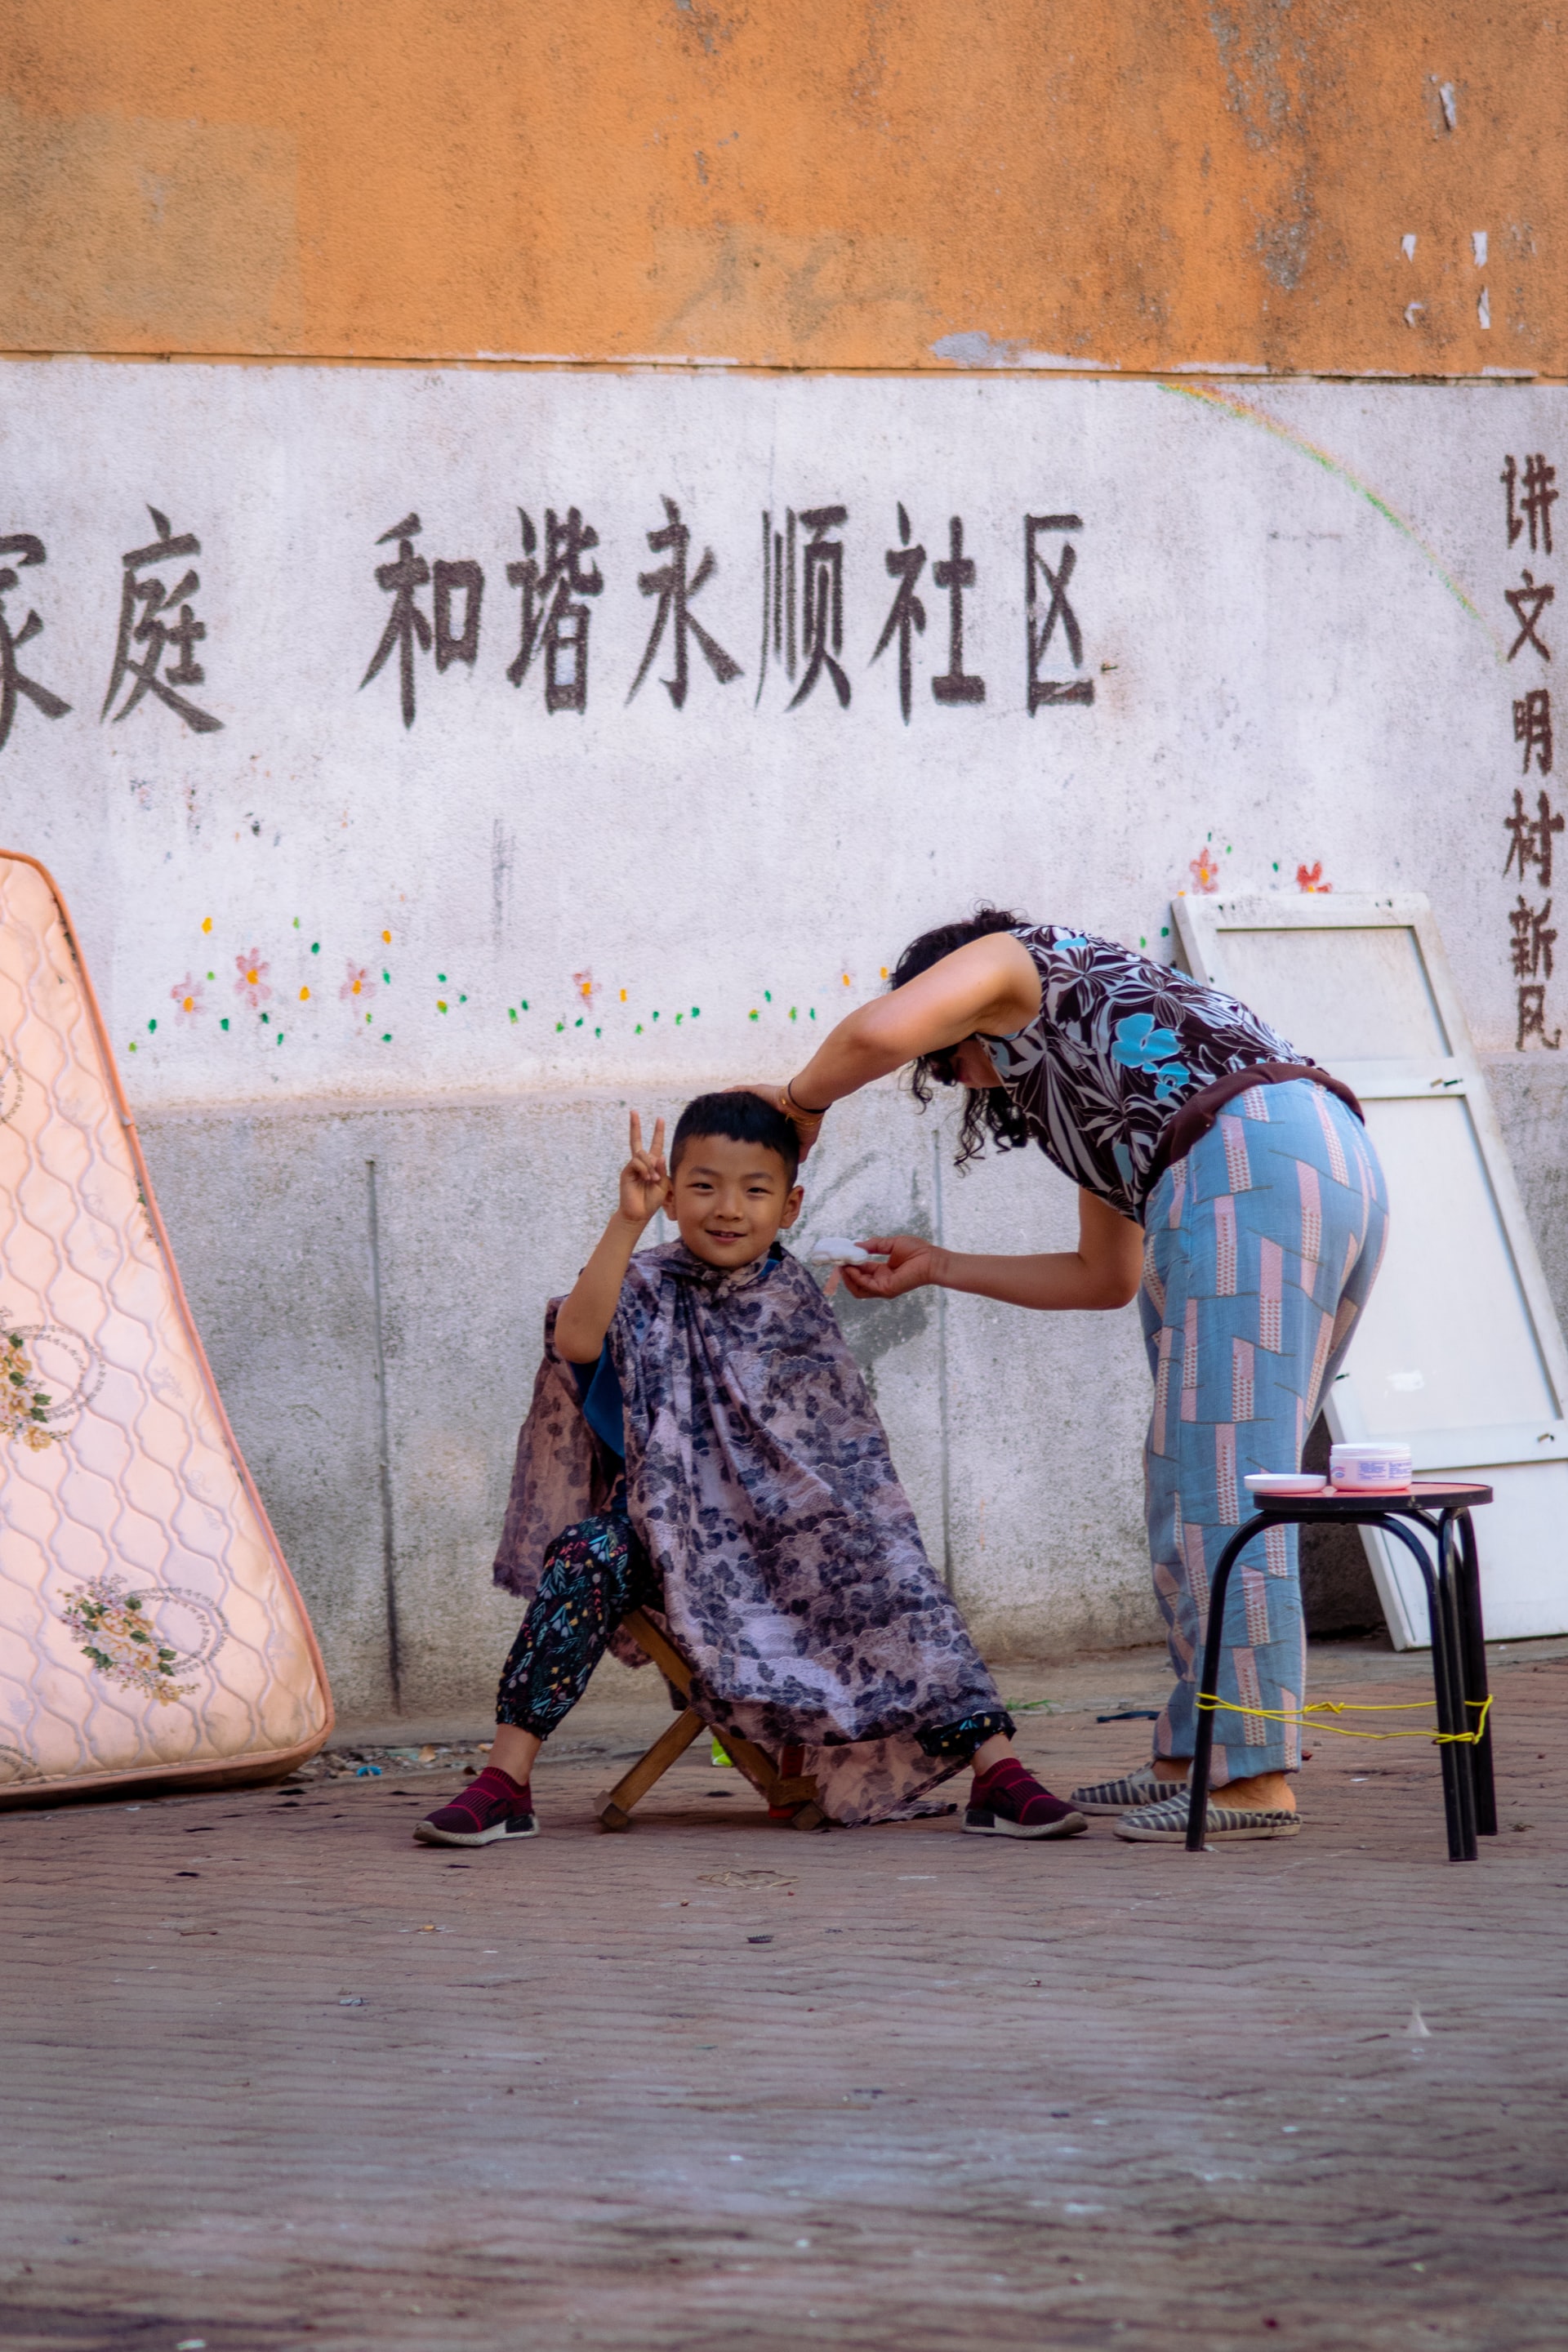 A little Chinese boy getting his haircut on the street.